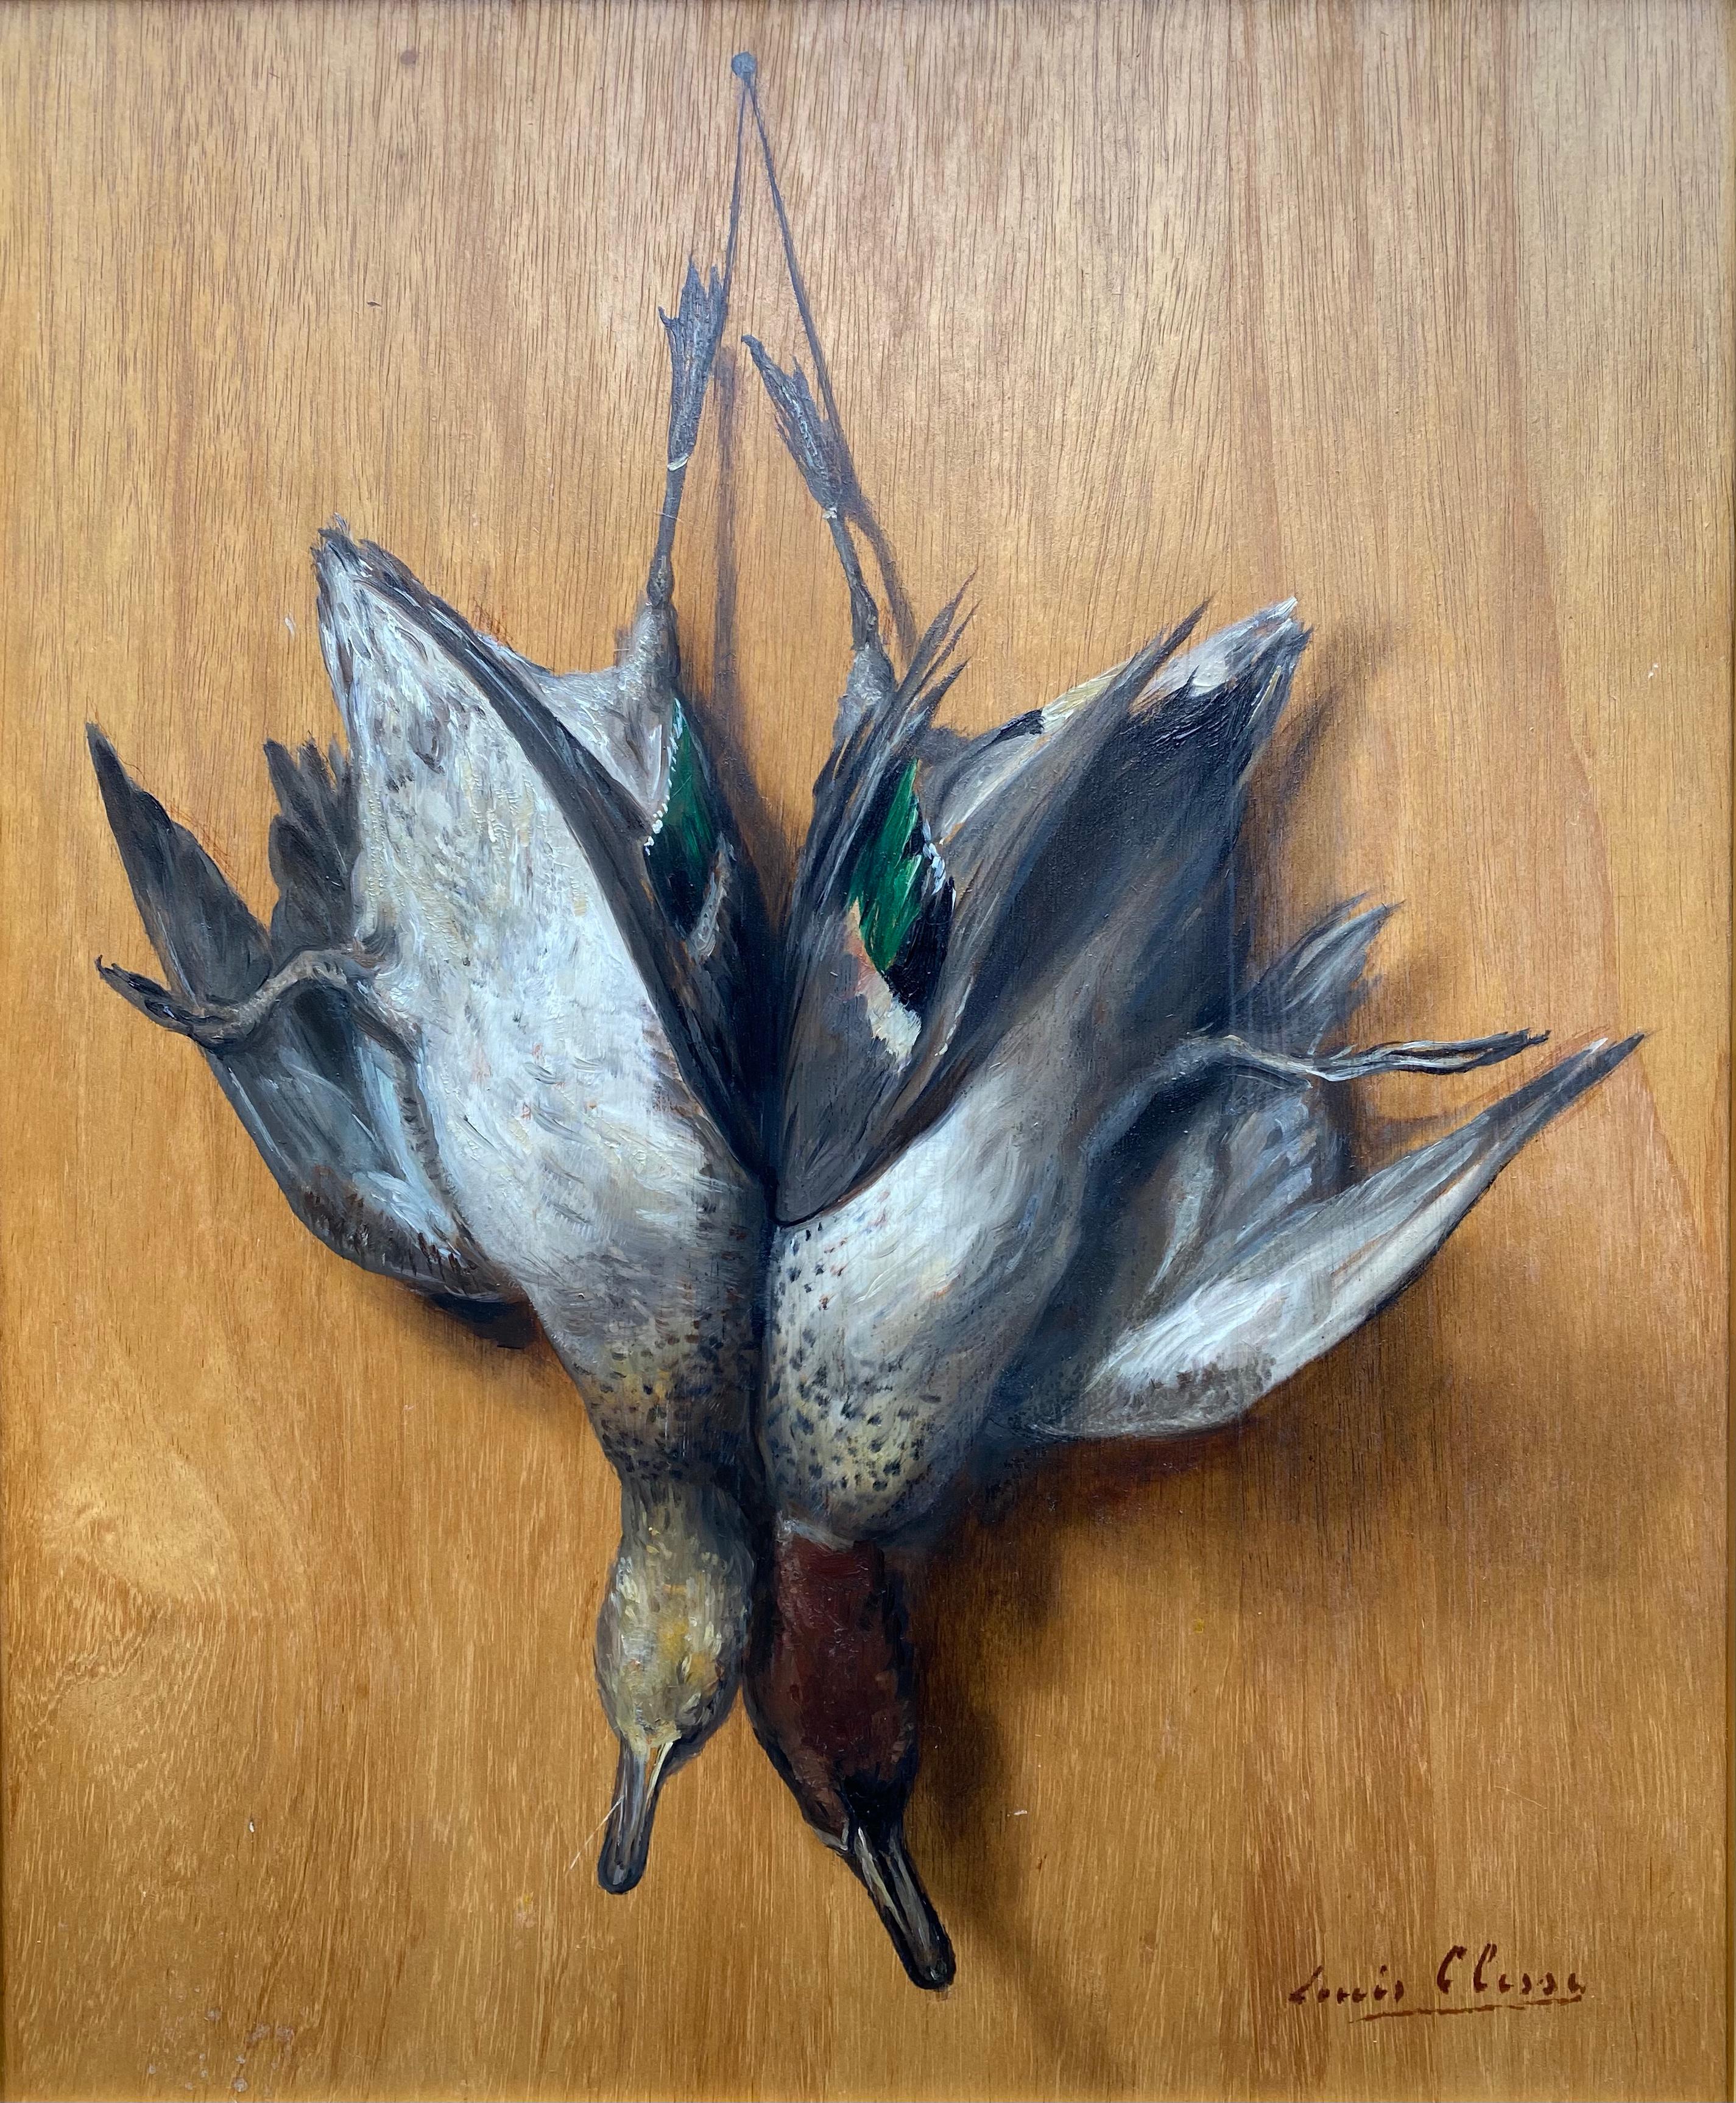 Trompe L’Oeil of Two Ducks, Louis Clesse, Brussels 1889 – 1961, Belgian Painter - Painting by Clesse Louis